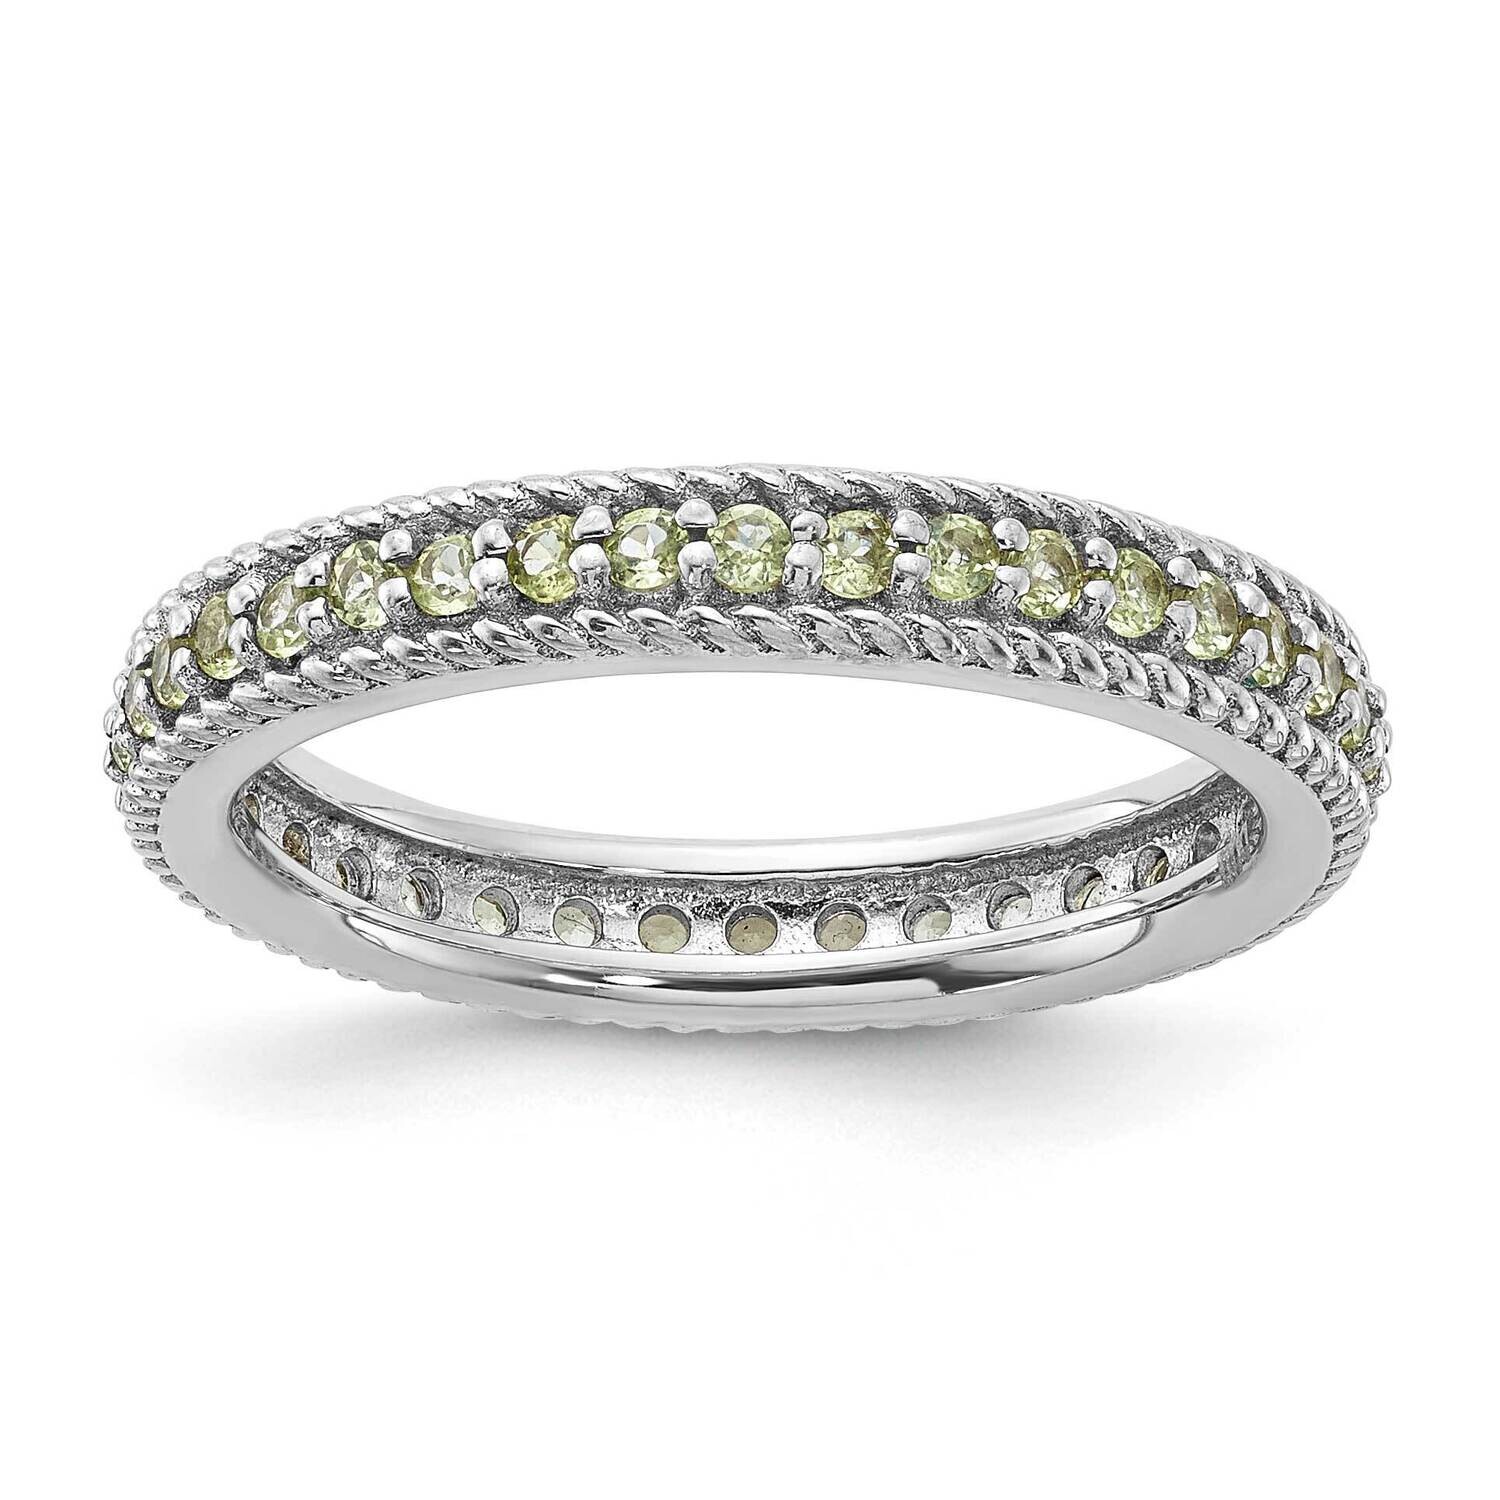 Stackable Expressions Polished Peridot Eternity Ring Sterling Silver QSK1453